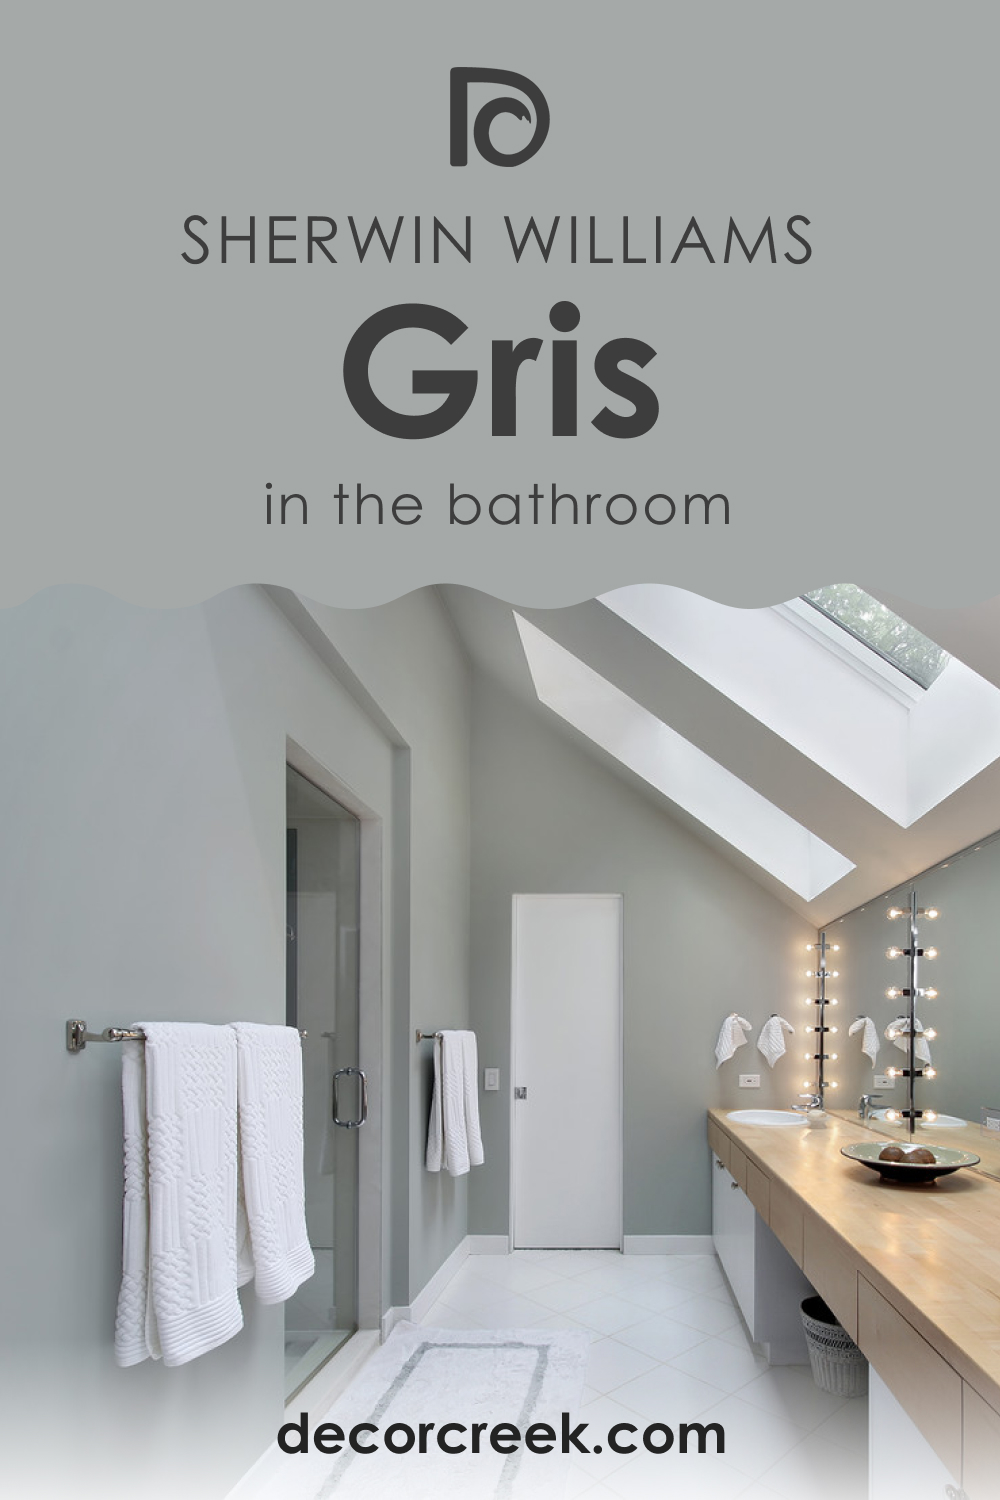 How to Use SW 7659 Gris in the Bathroom?